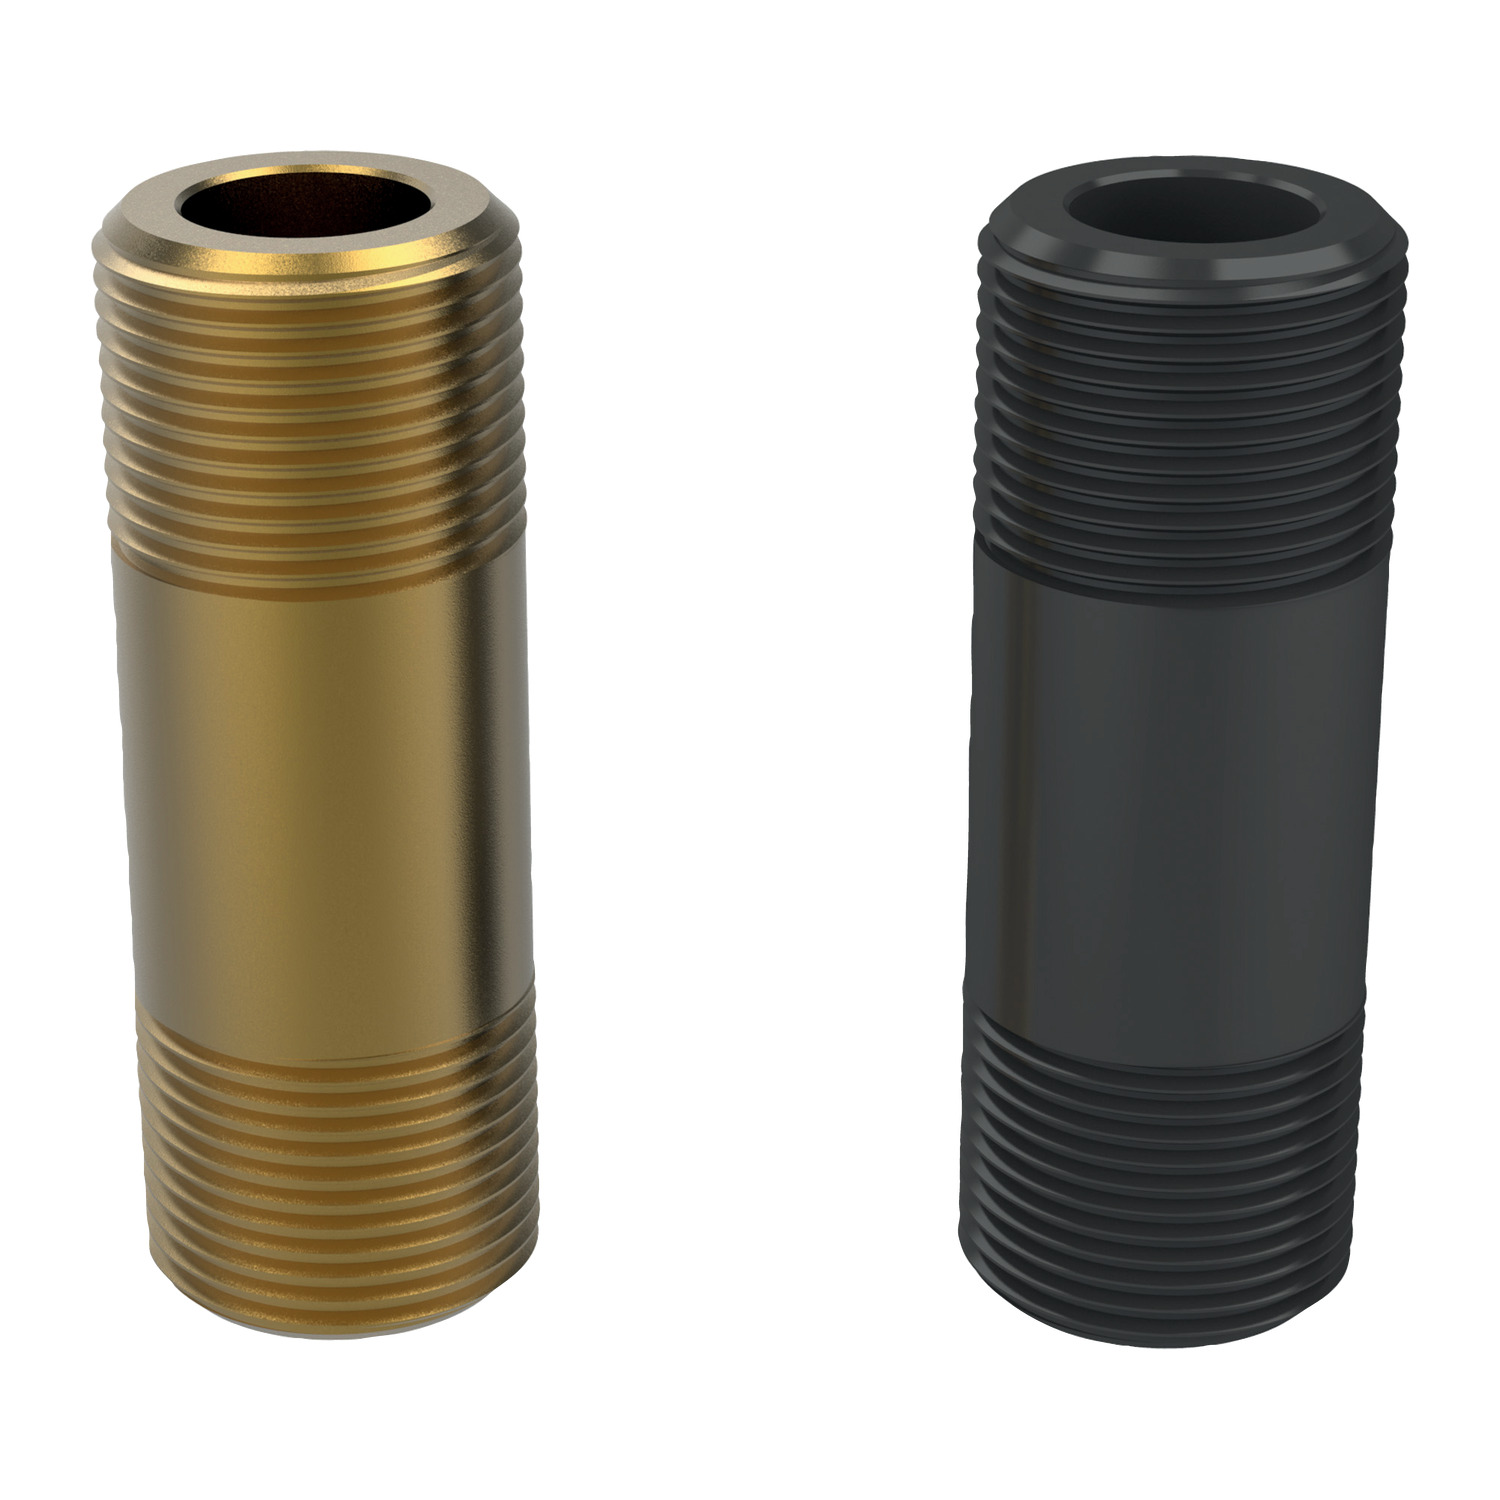 20034.W3370-B Dual Fit Fittings - Acetal or Brass. Dual Fit Fittings - Acetal or Brass.